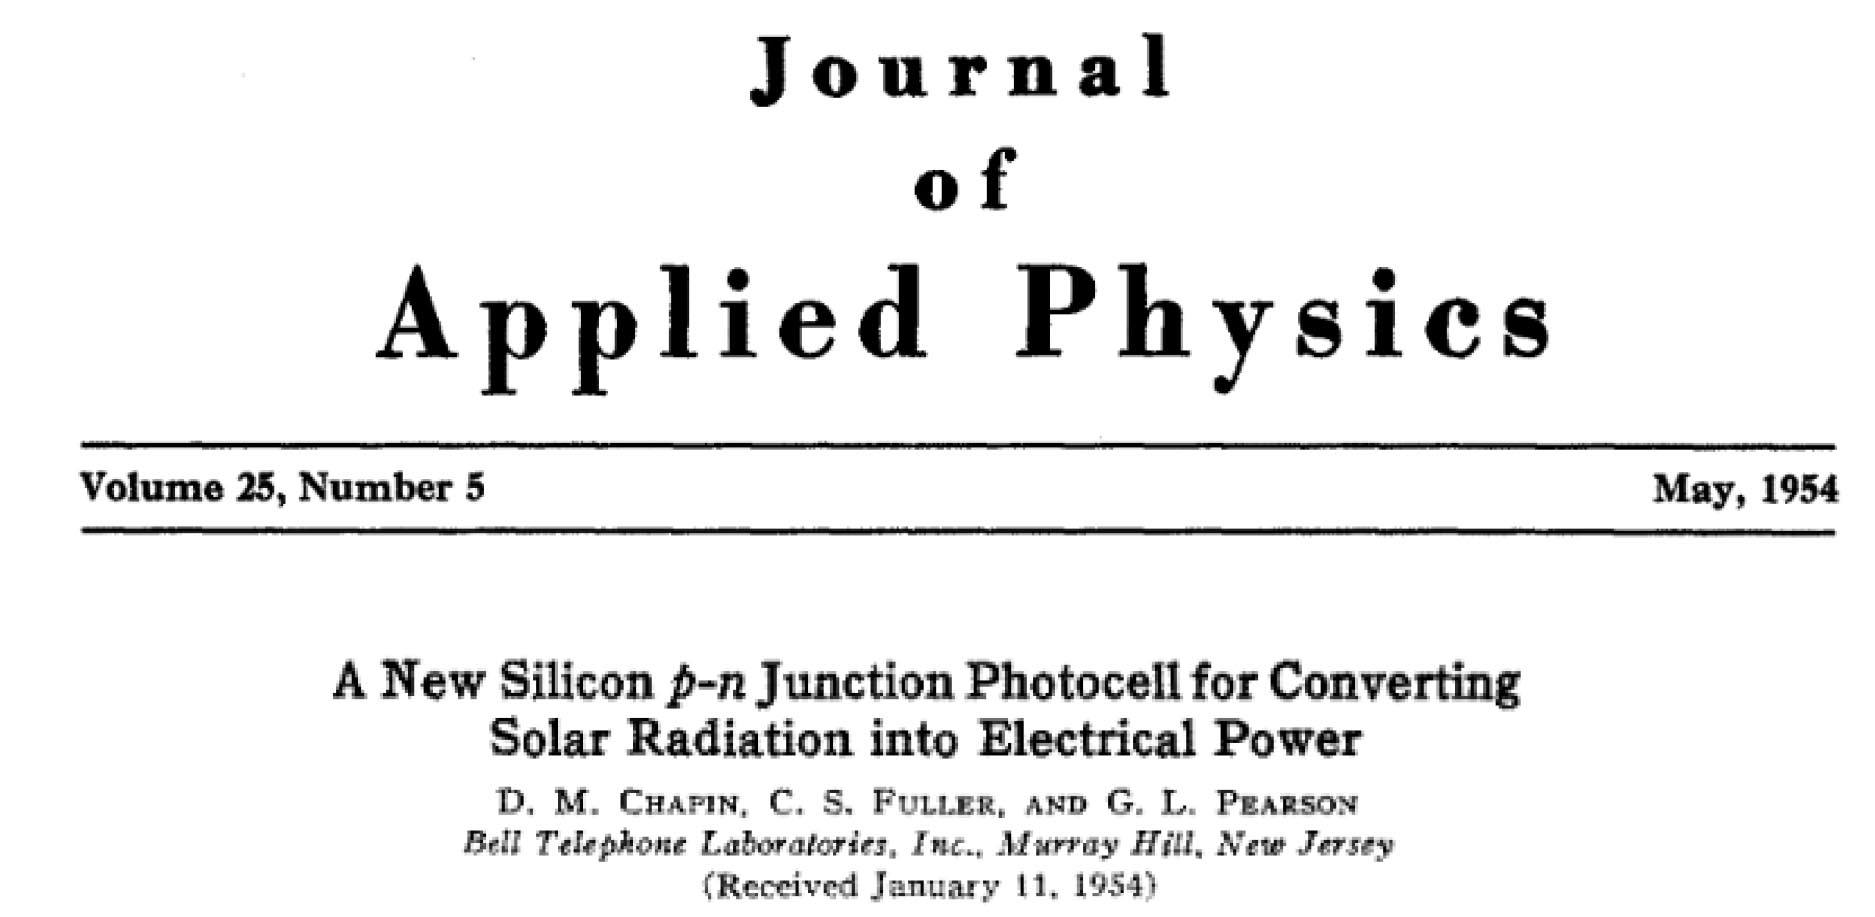 The title of a paper from the Journal of Applied Physics on converting solar radiation into electrical power, dated May 1954.